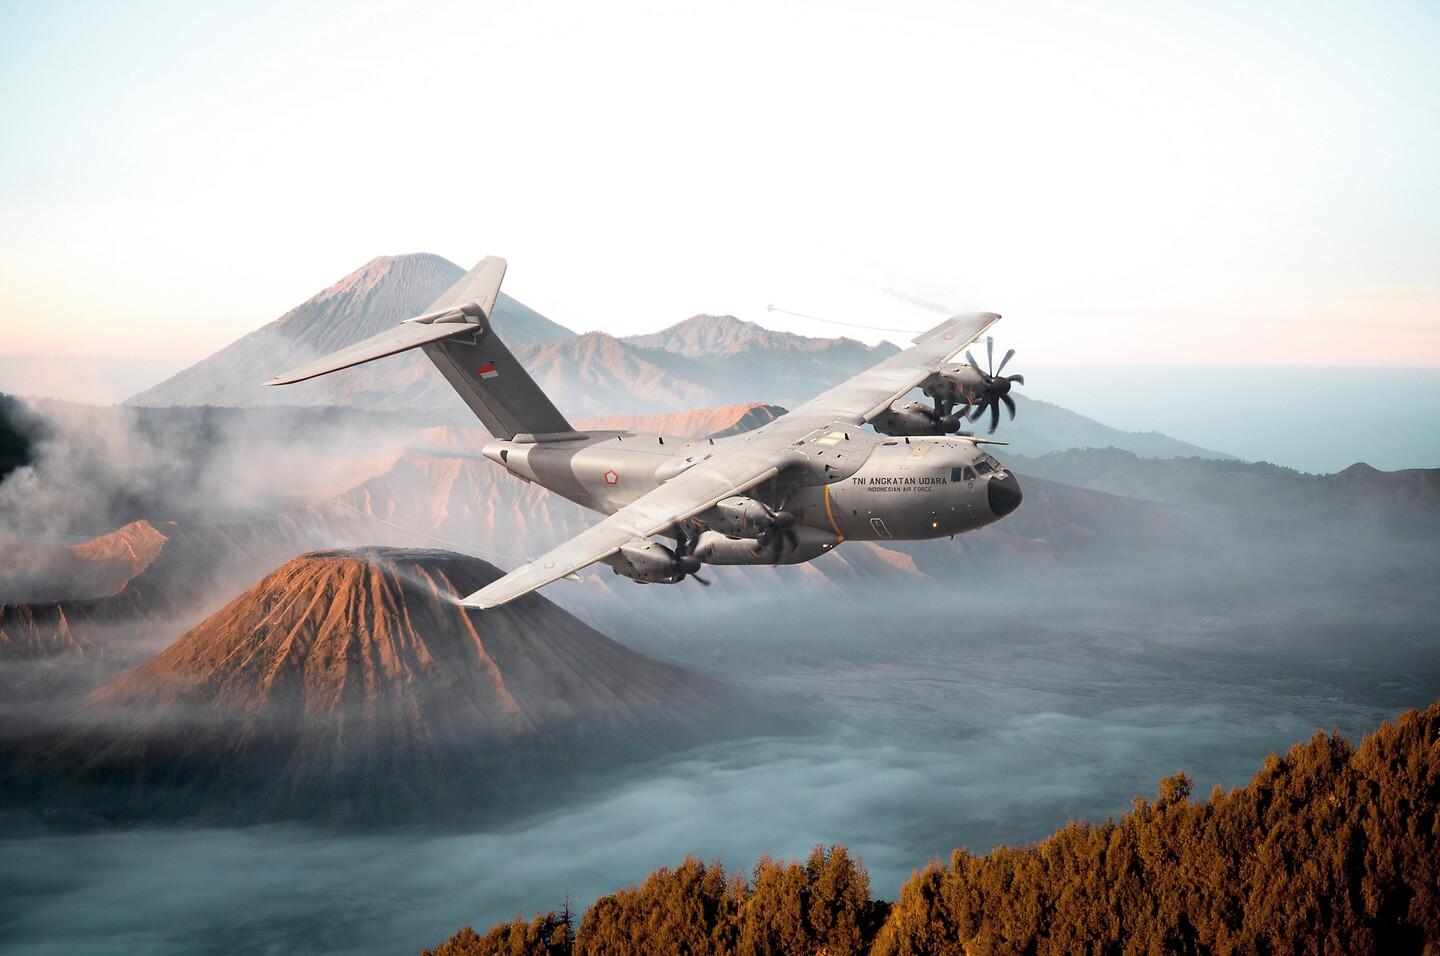 Indonesian A400M concept